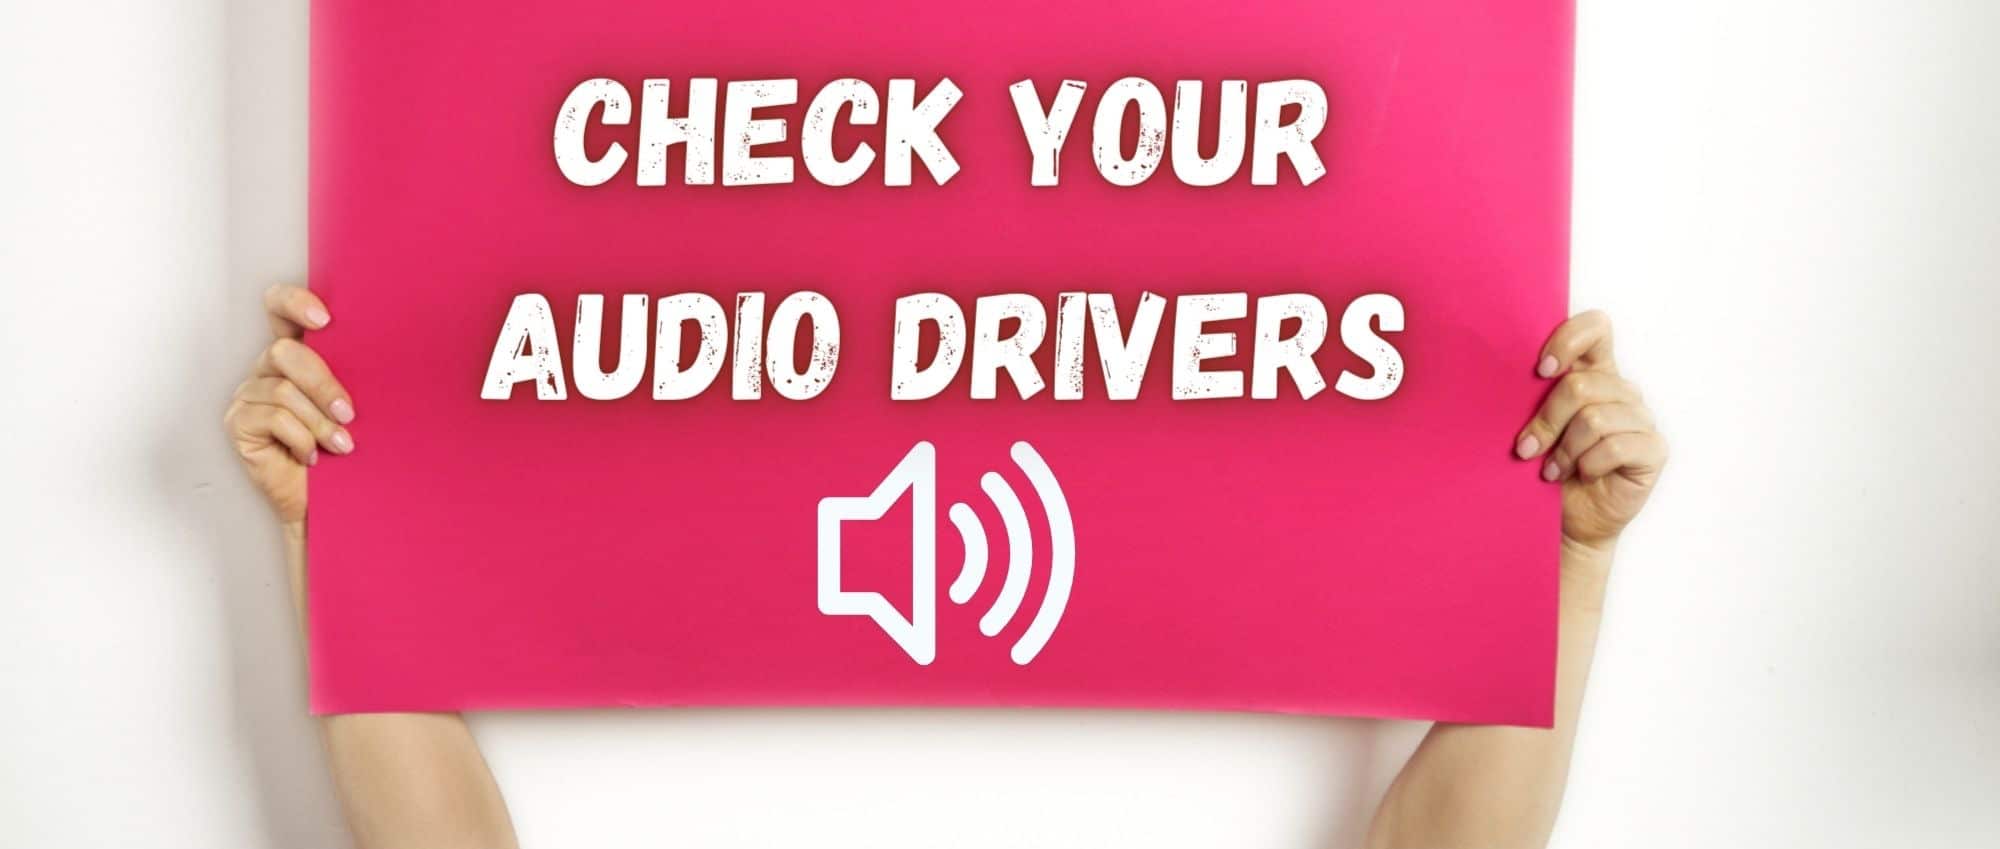 Check your Audio Drivers